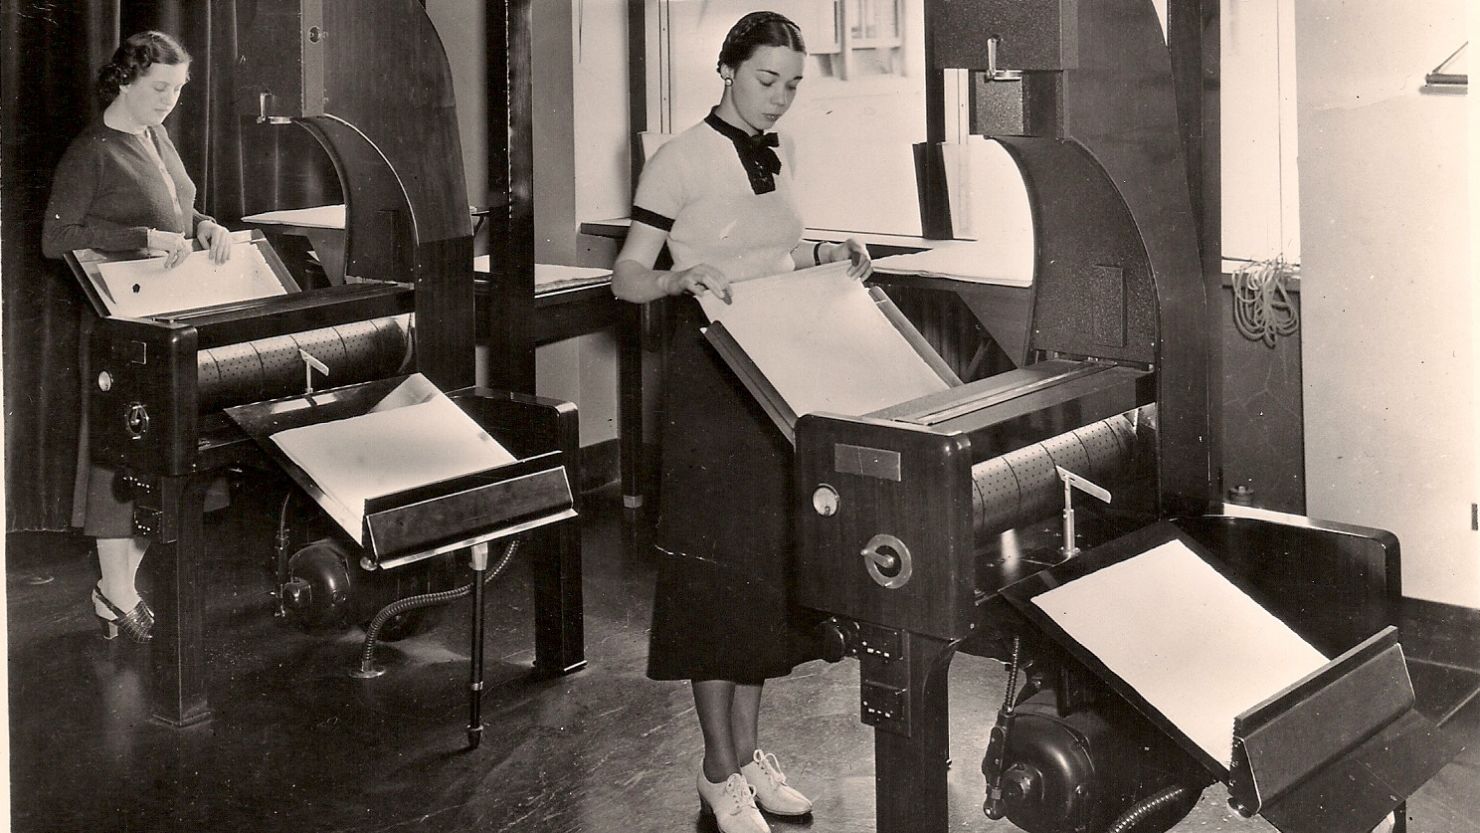 Census Bureau employees process microfilm records, circa 1940. Online records mean no more traveling to microfilm archives.